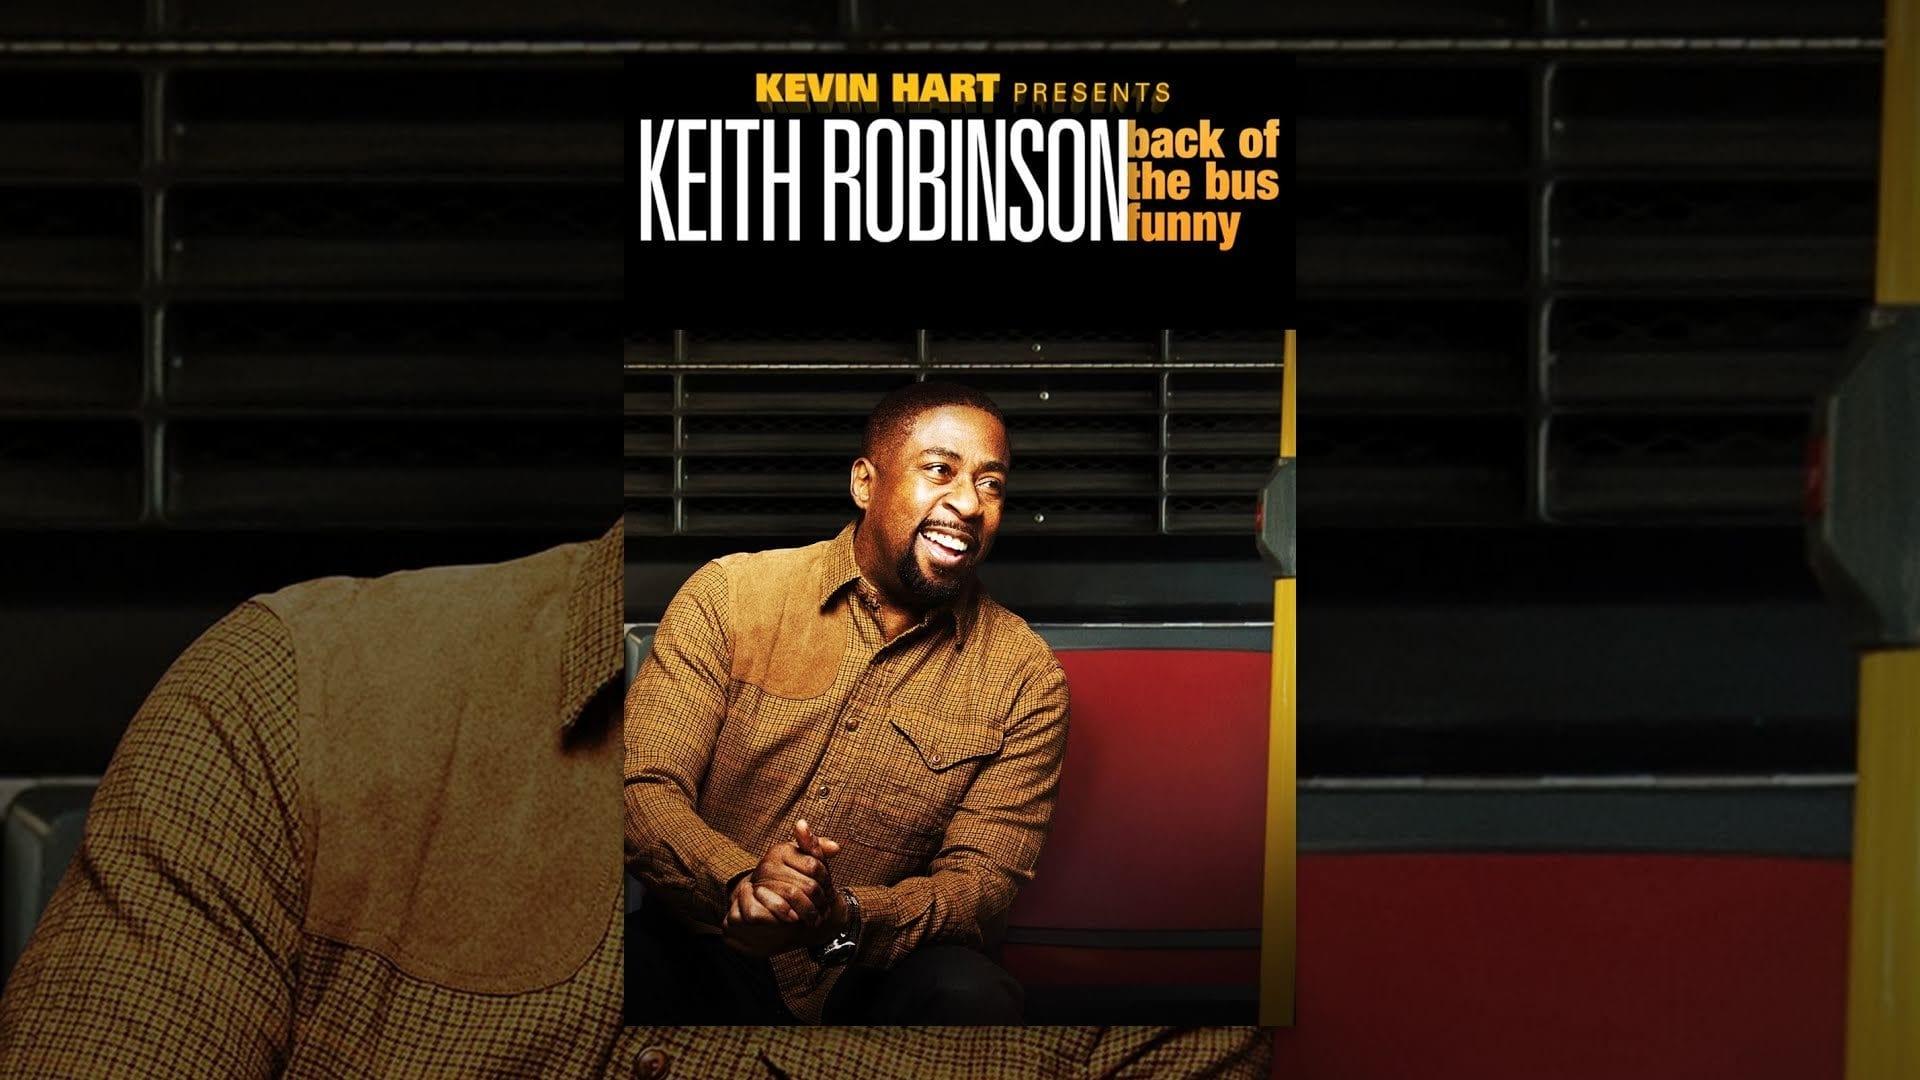 Keith Robinson: Back of the Bus Funny backdrop